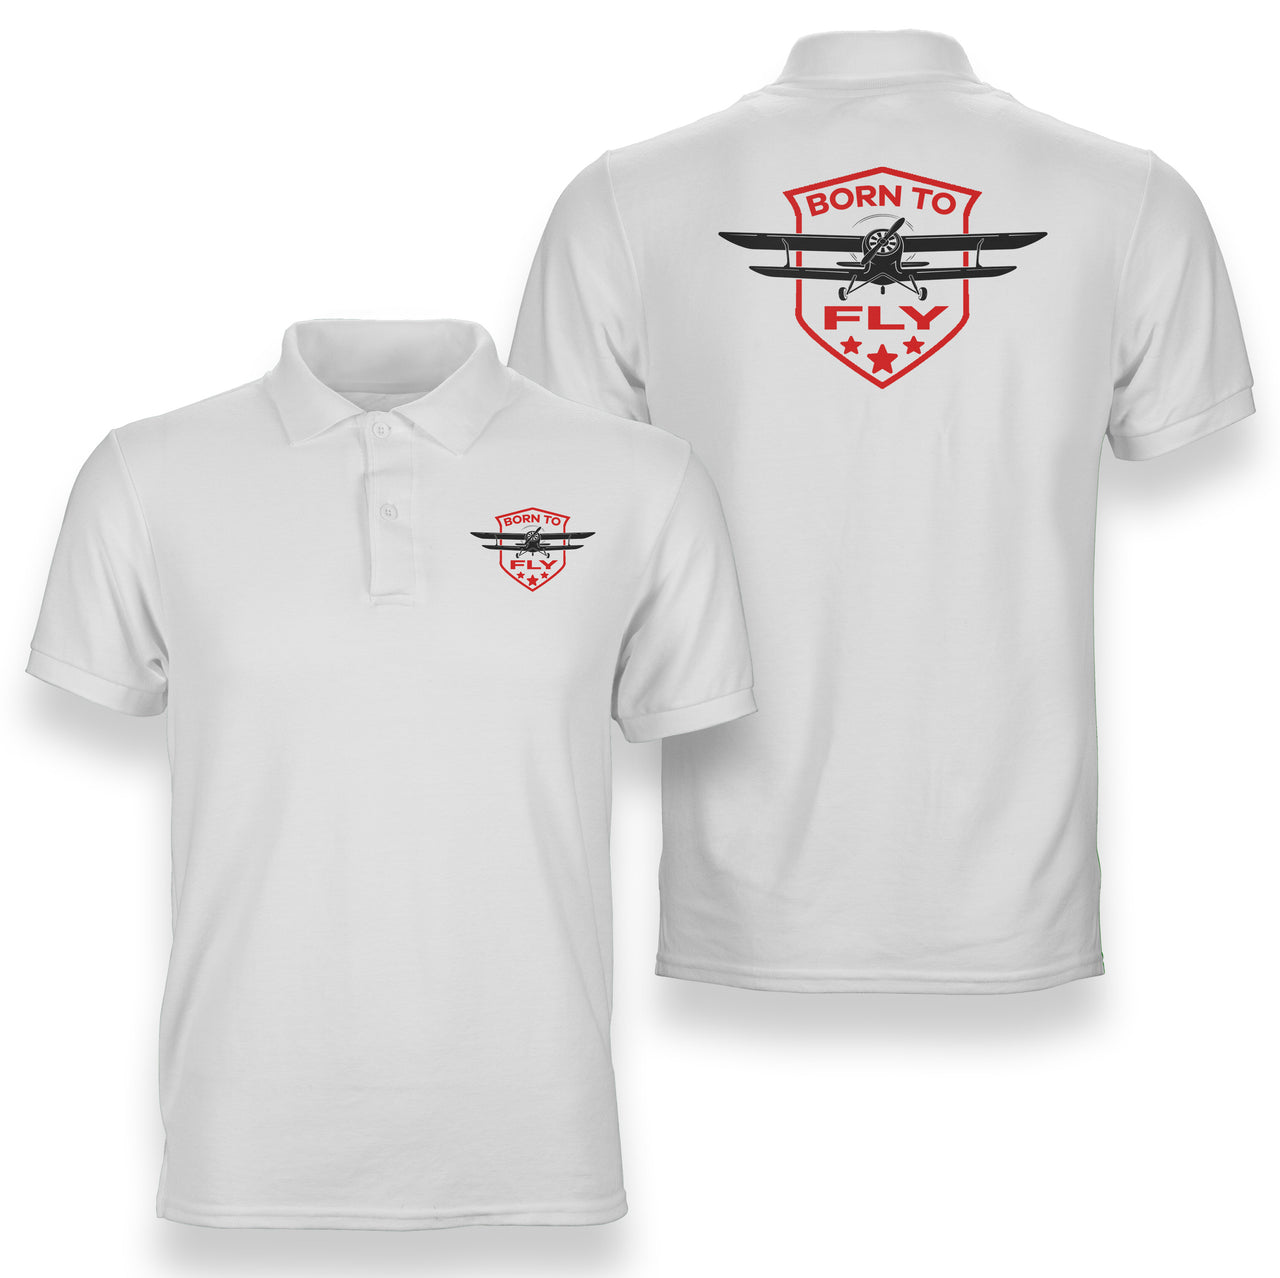 Born To Fly Designed Designed Double Side Polo T-Shirts